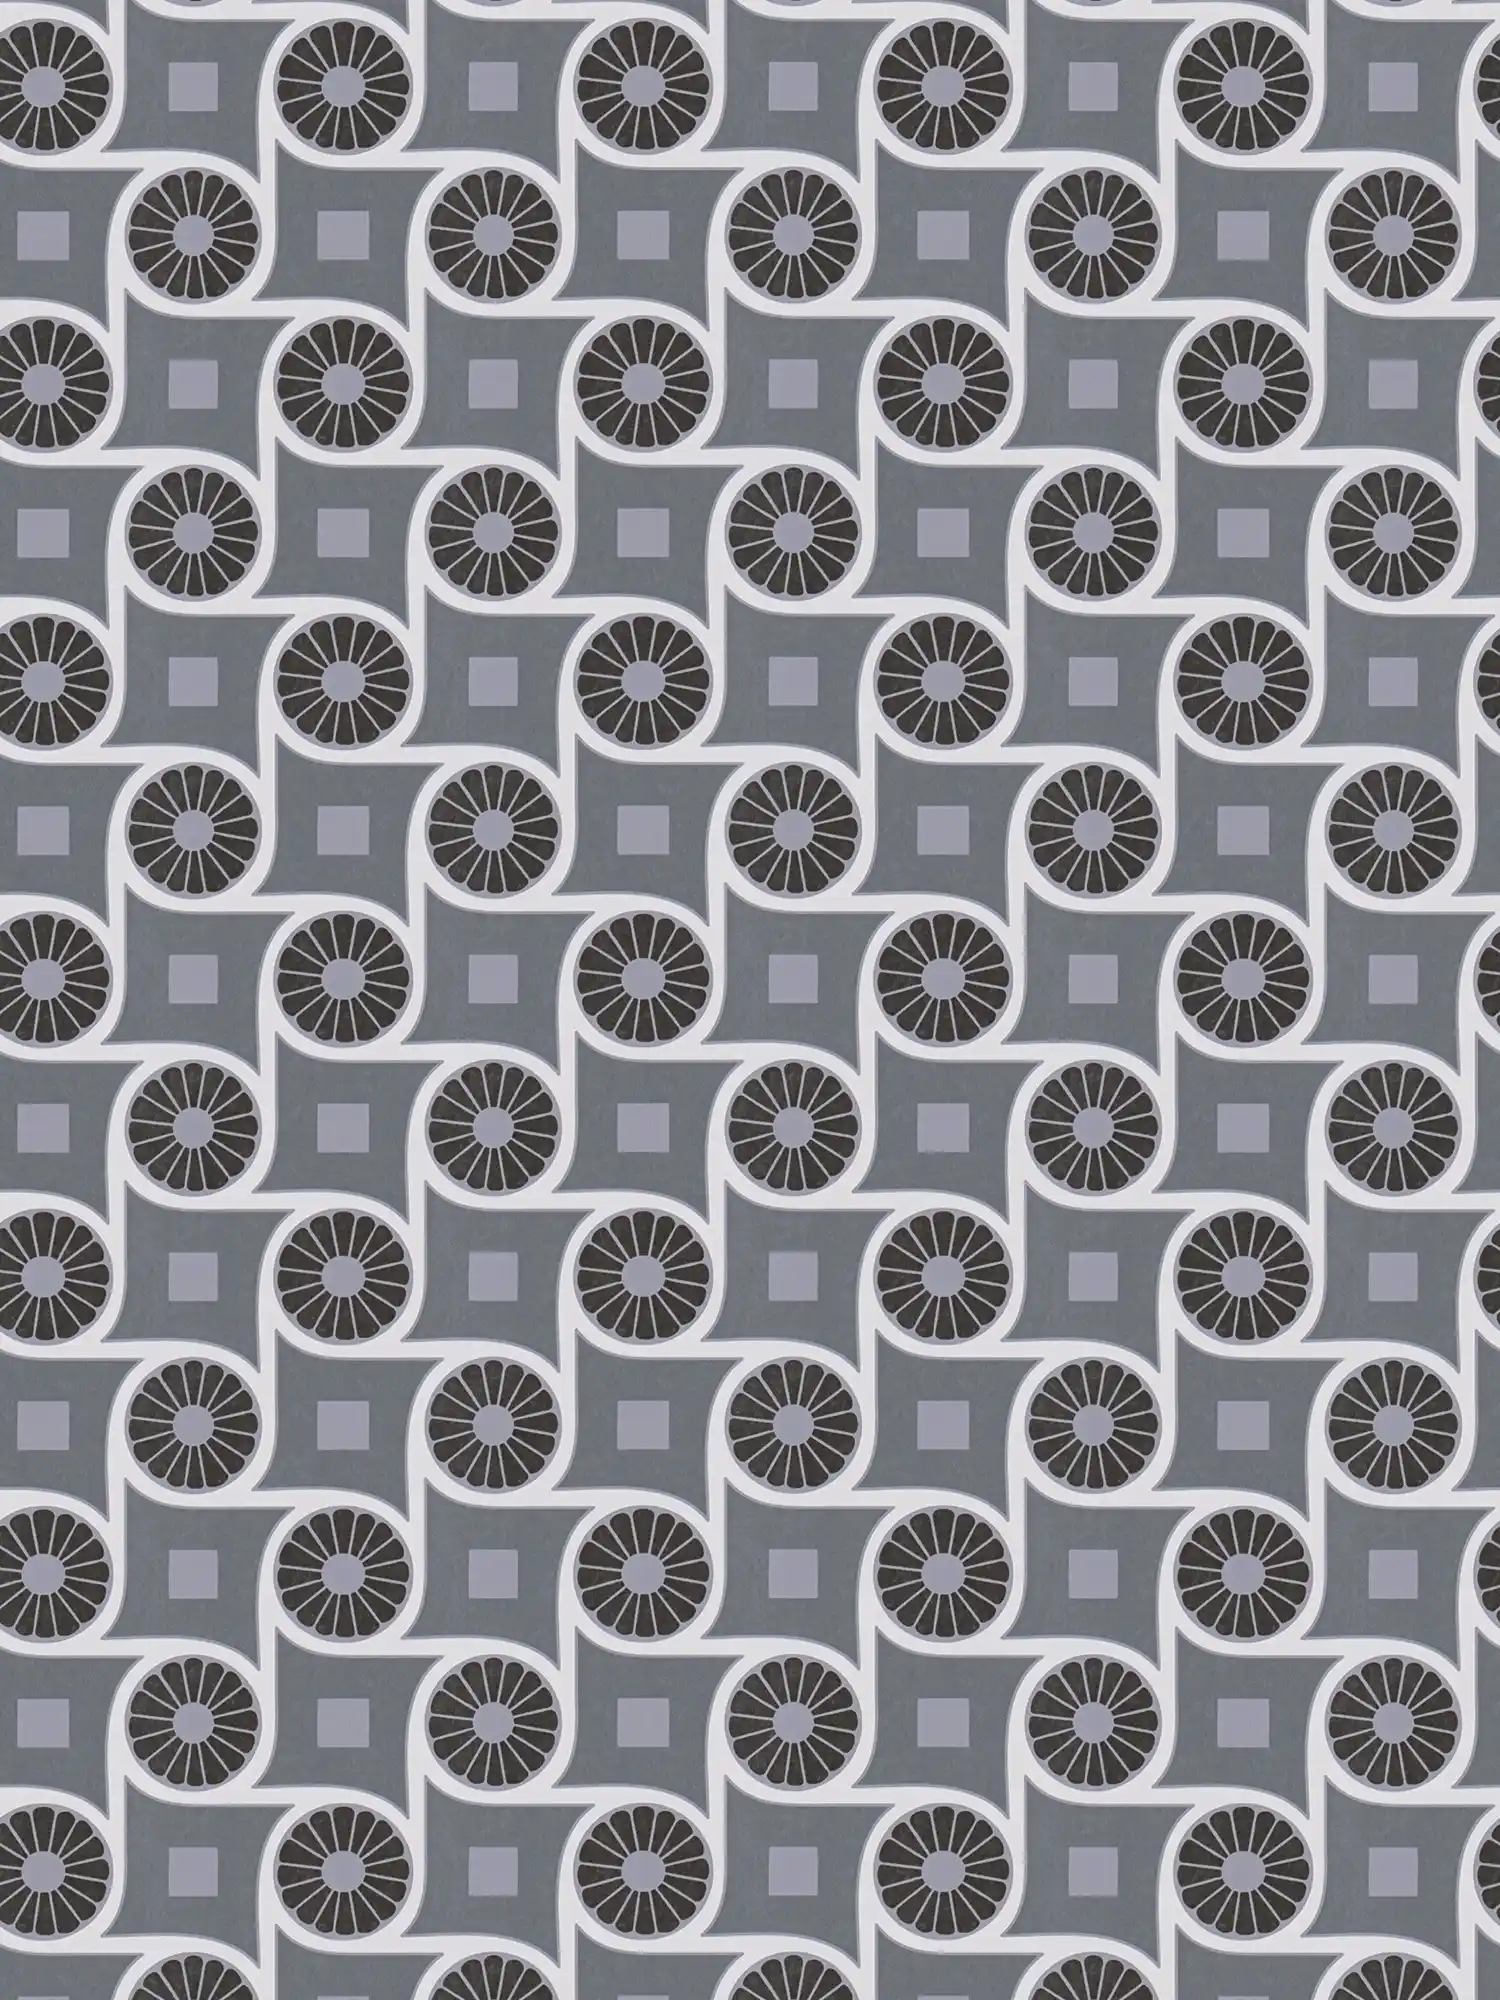 Retro style wallpaper with circle pattern and squares - grey, white, black
